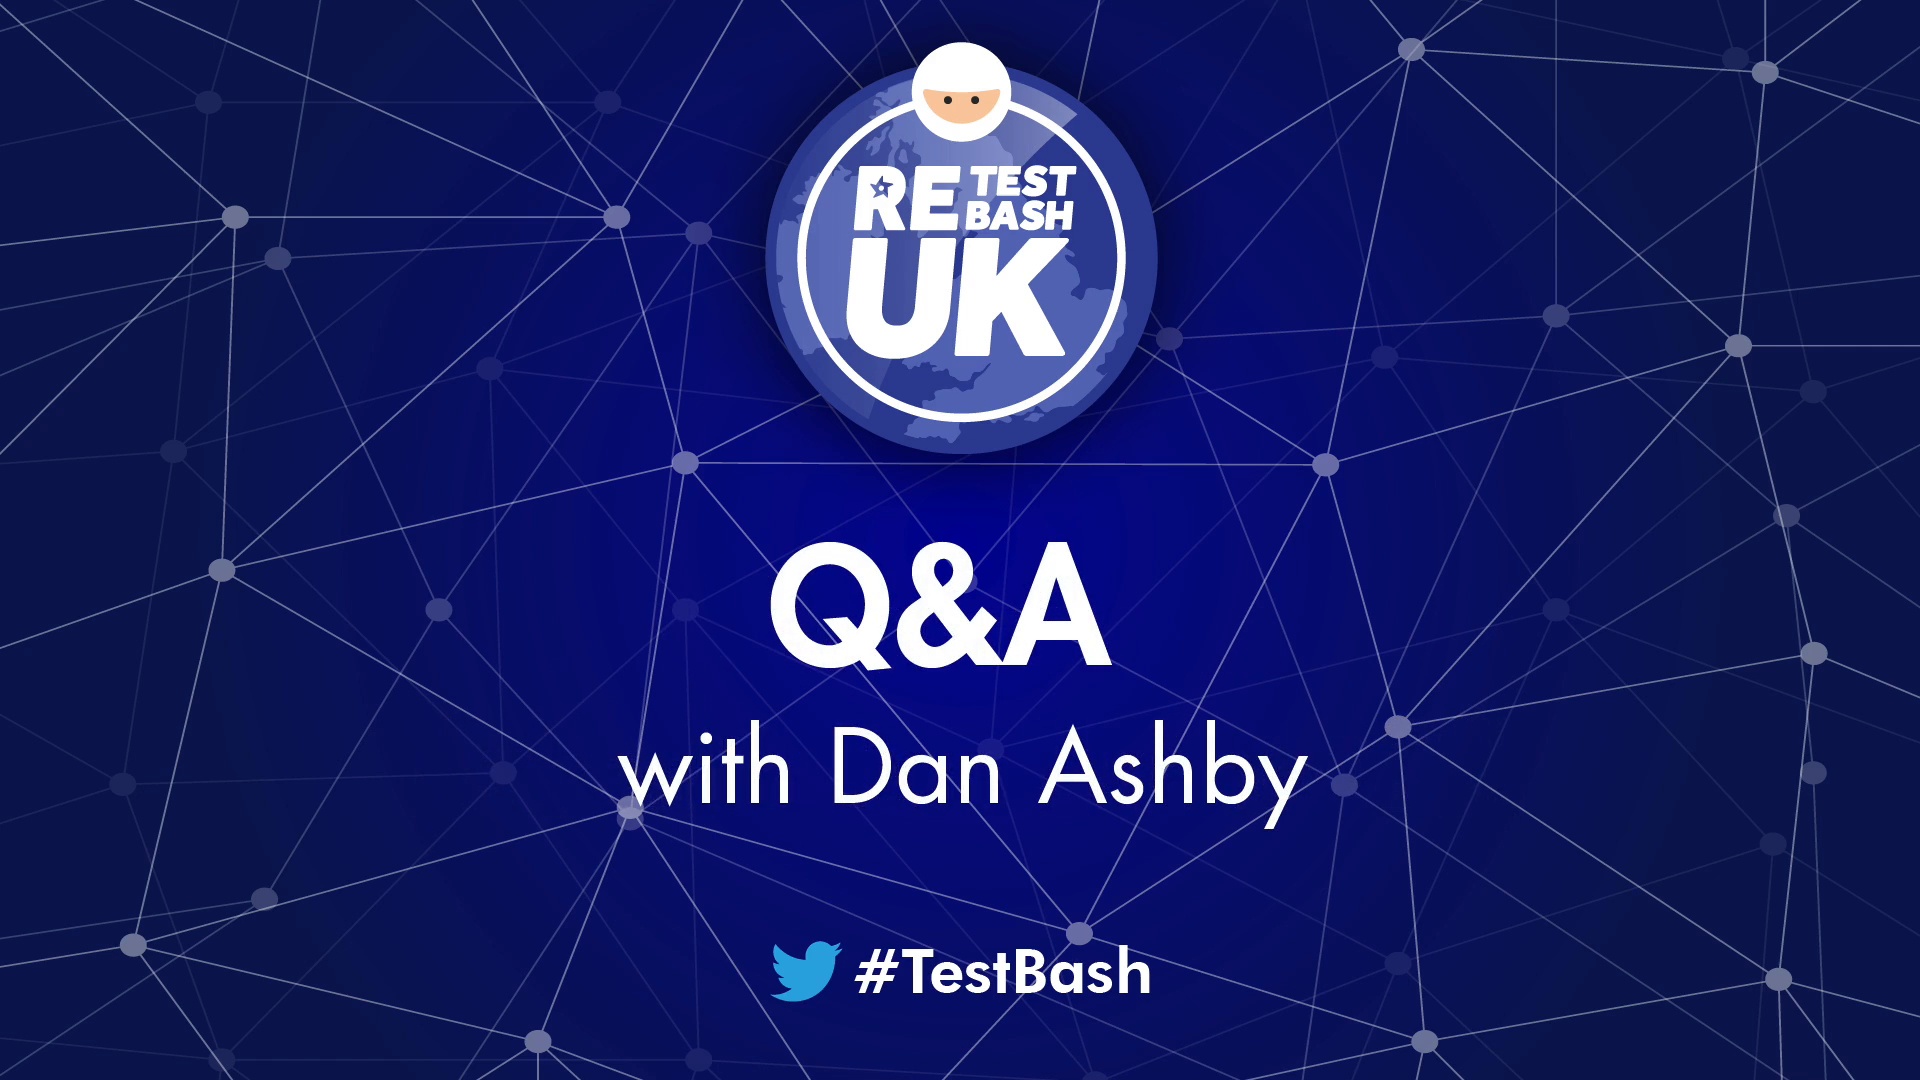 ReTestBash UK 2022: Live Q&A with Dan Ashby